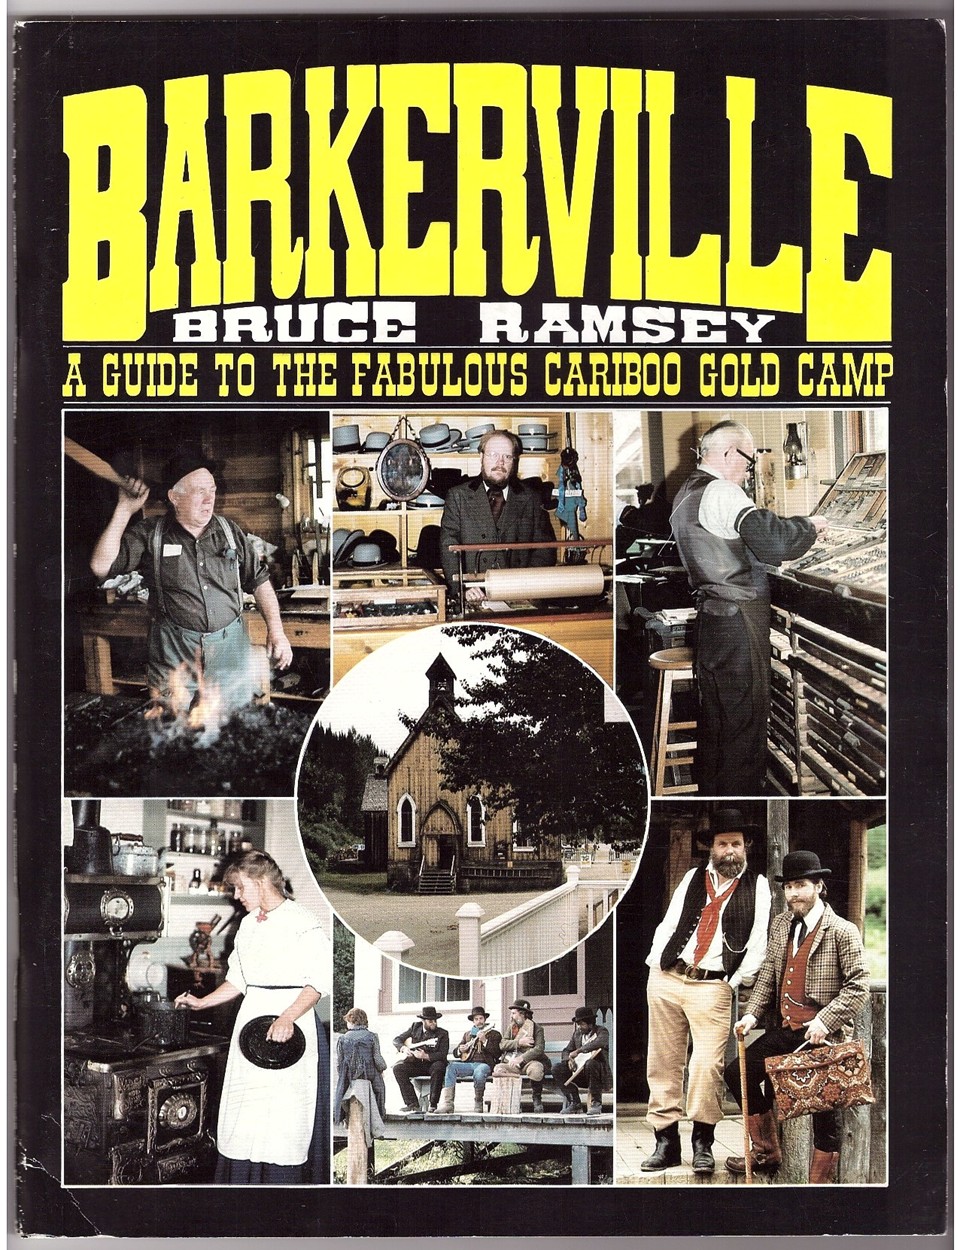 RAMSAY, BRUCE & COLOR AND B&W ILLUSTRATIONS - Barkerville a Guide to the Fabulous Cariboo Gold Camp